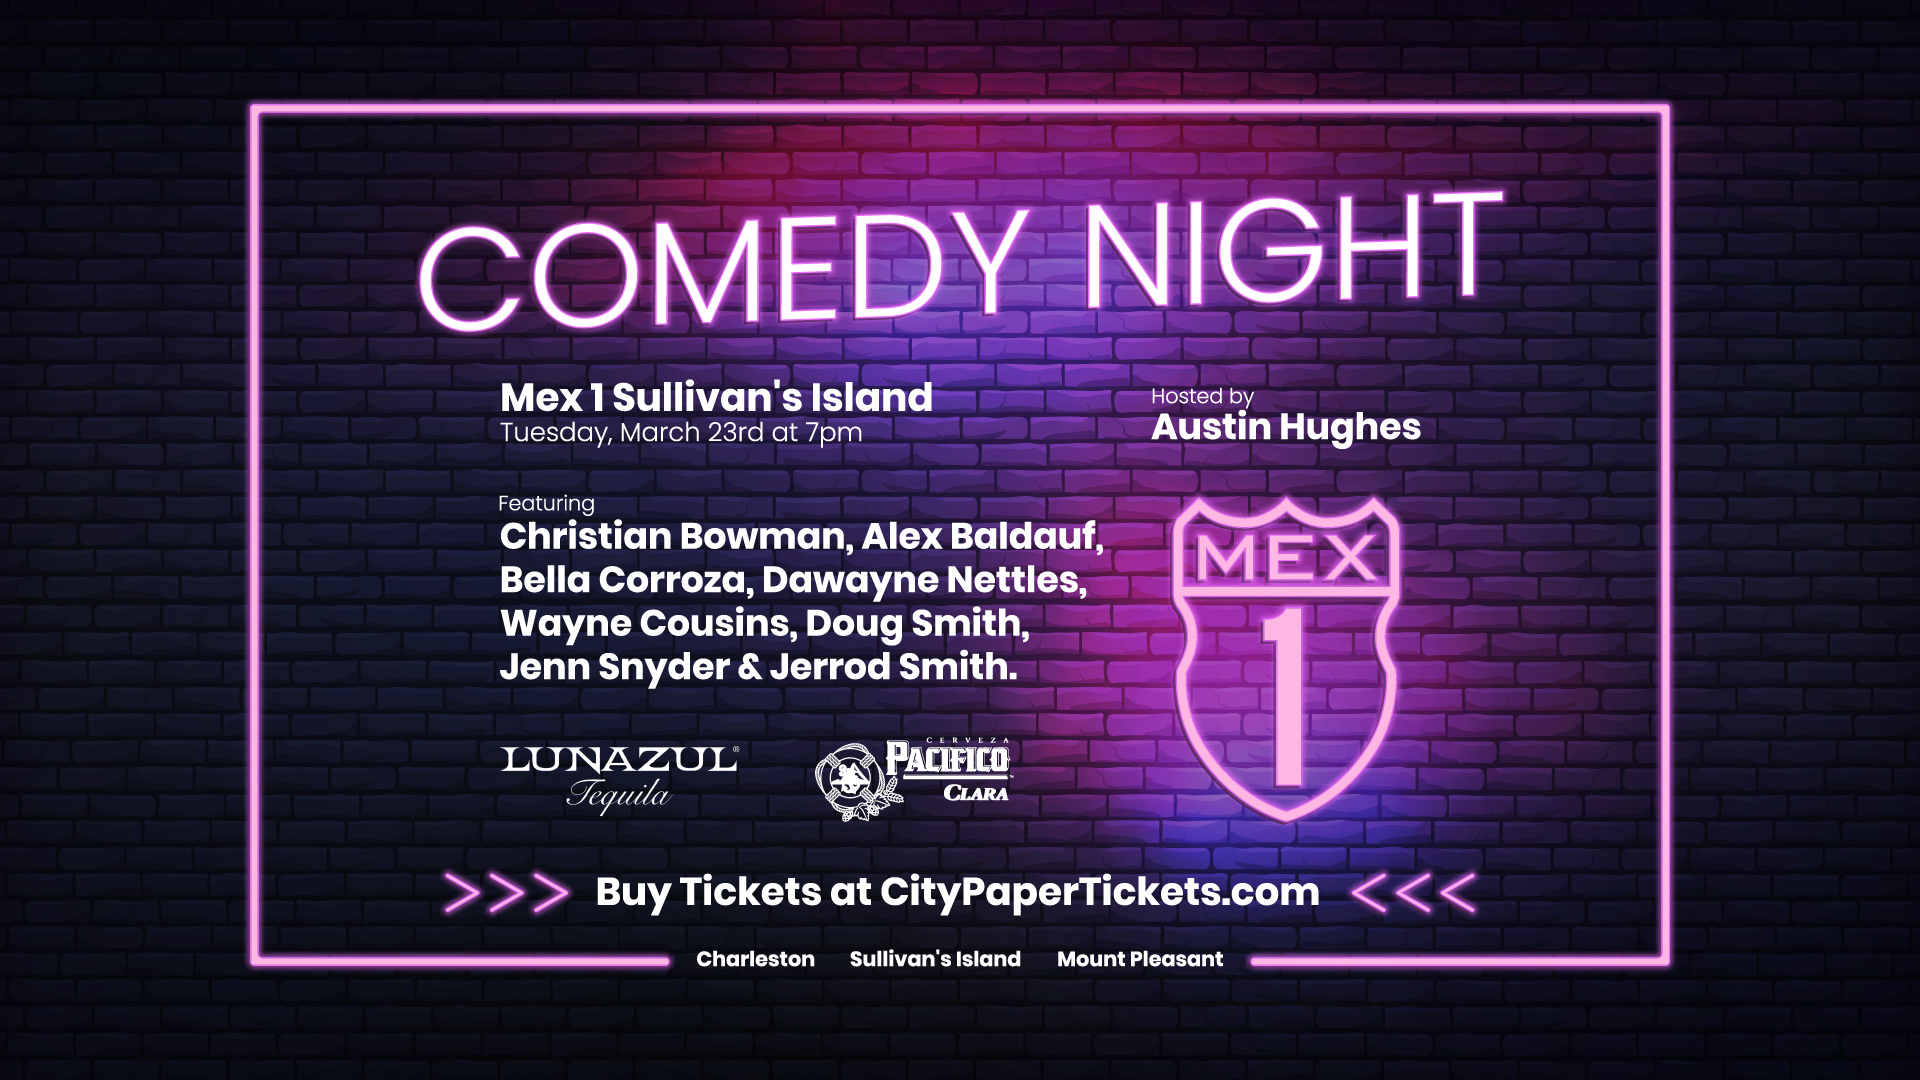 Comedy Night at Mex 1 Sullivan's Island on Tuesday, March 23rd